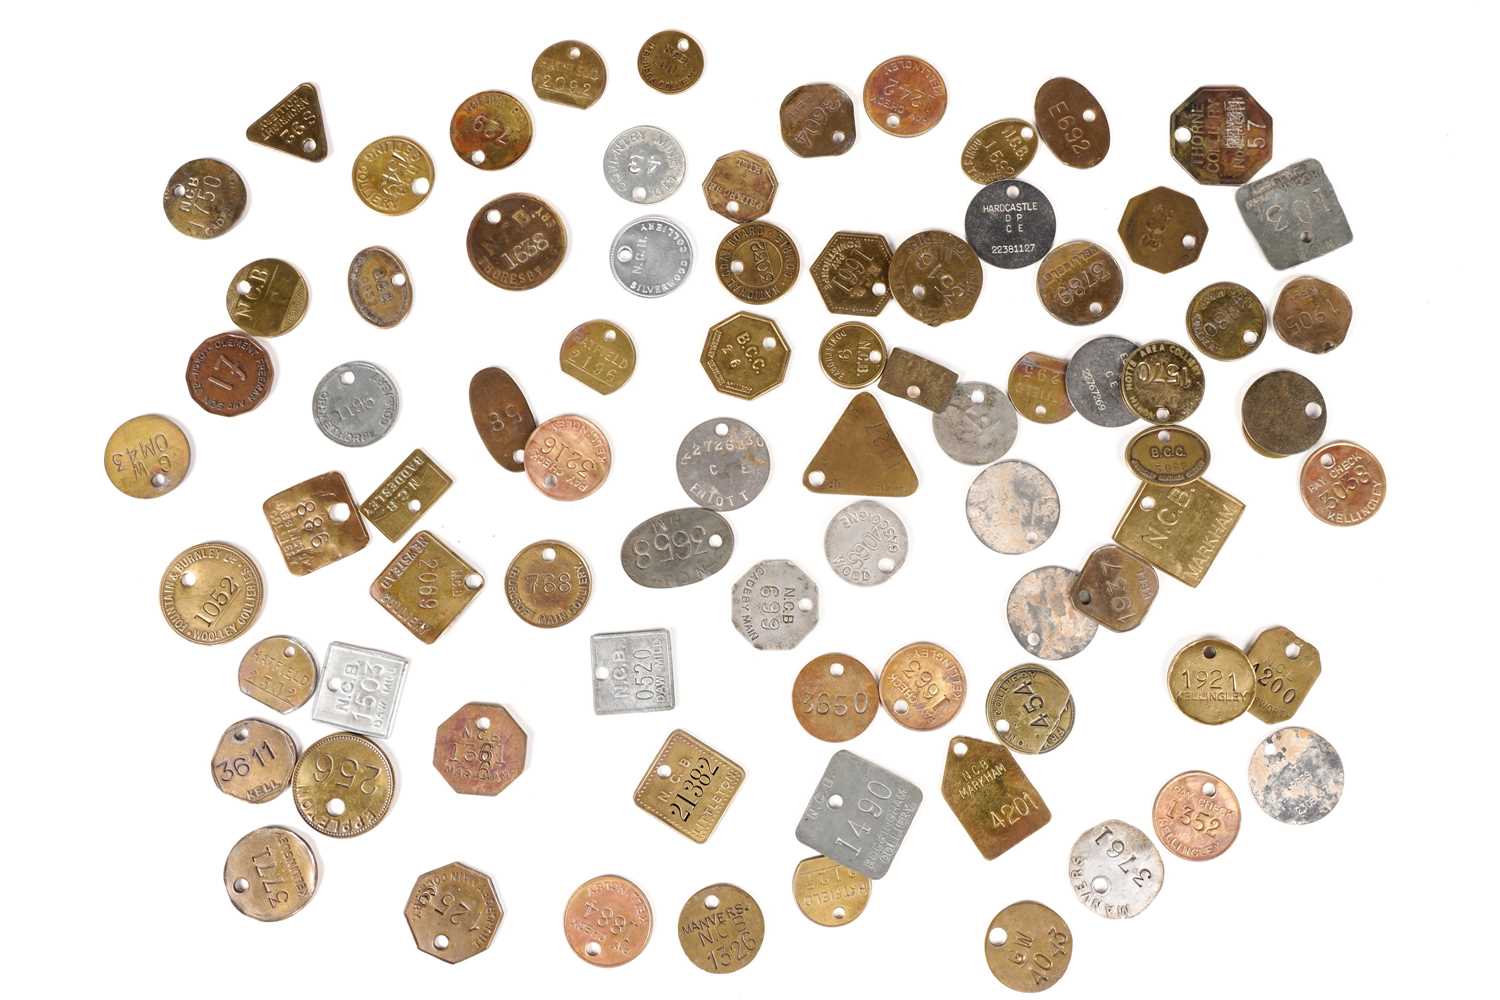 Eighty National Coal Board pit check tokens